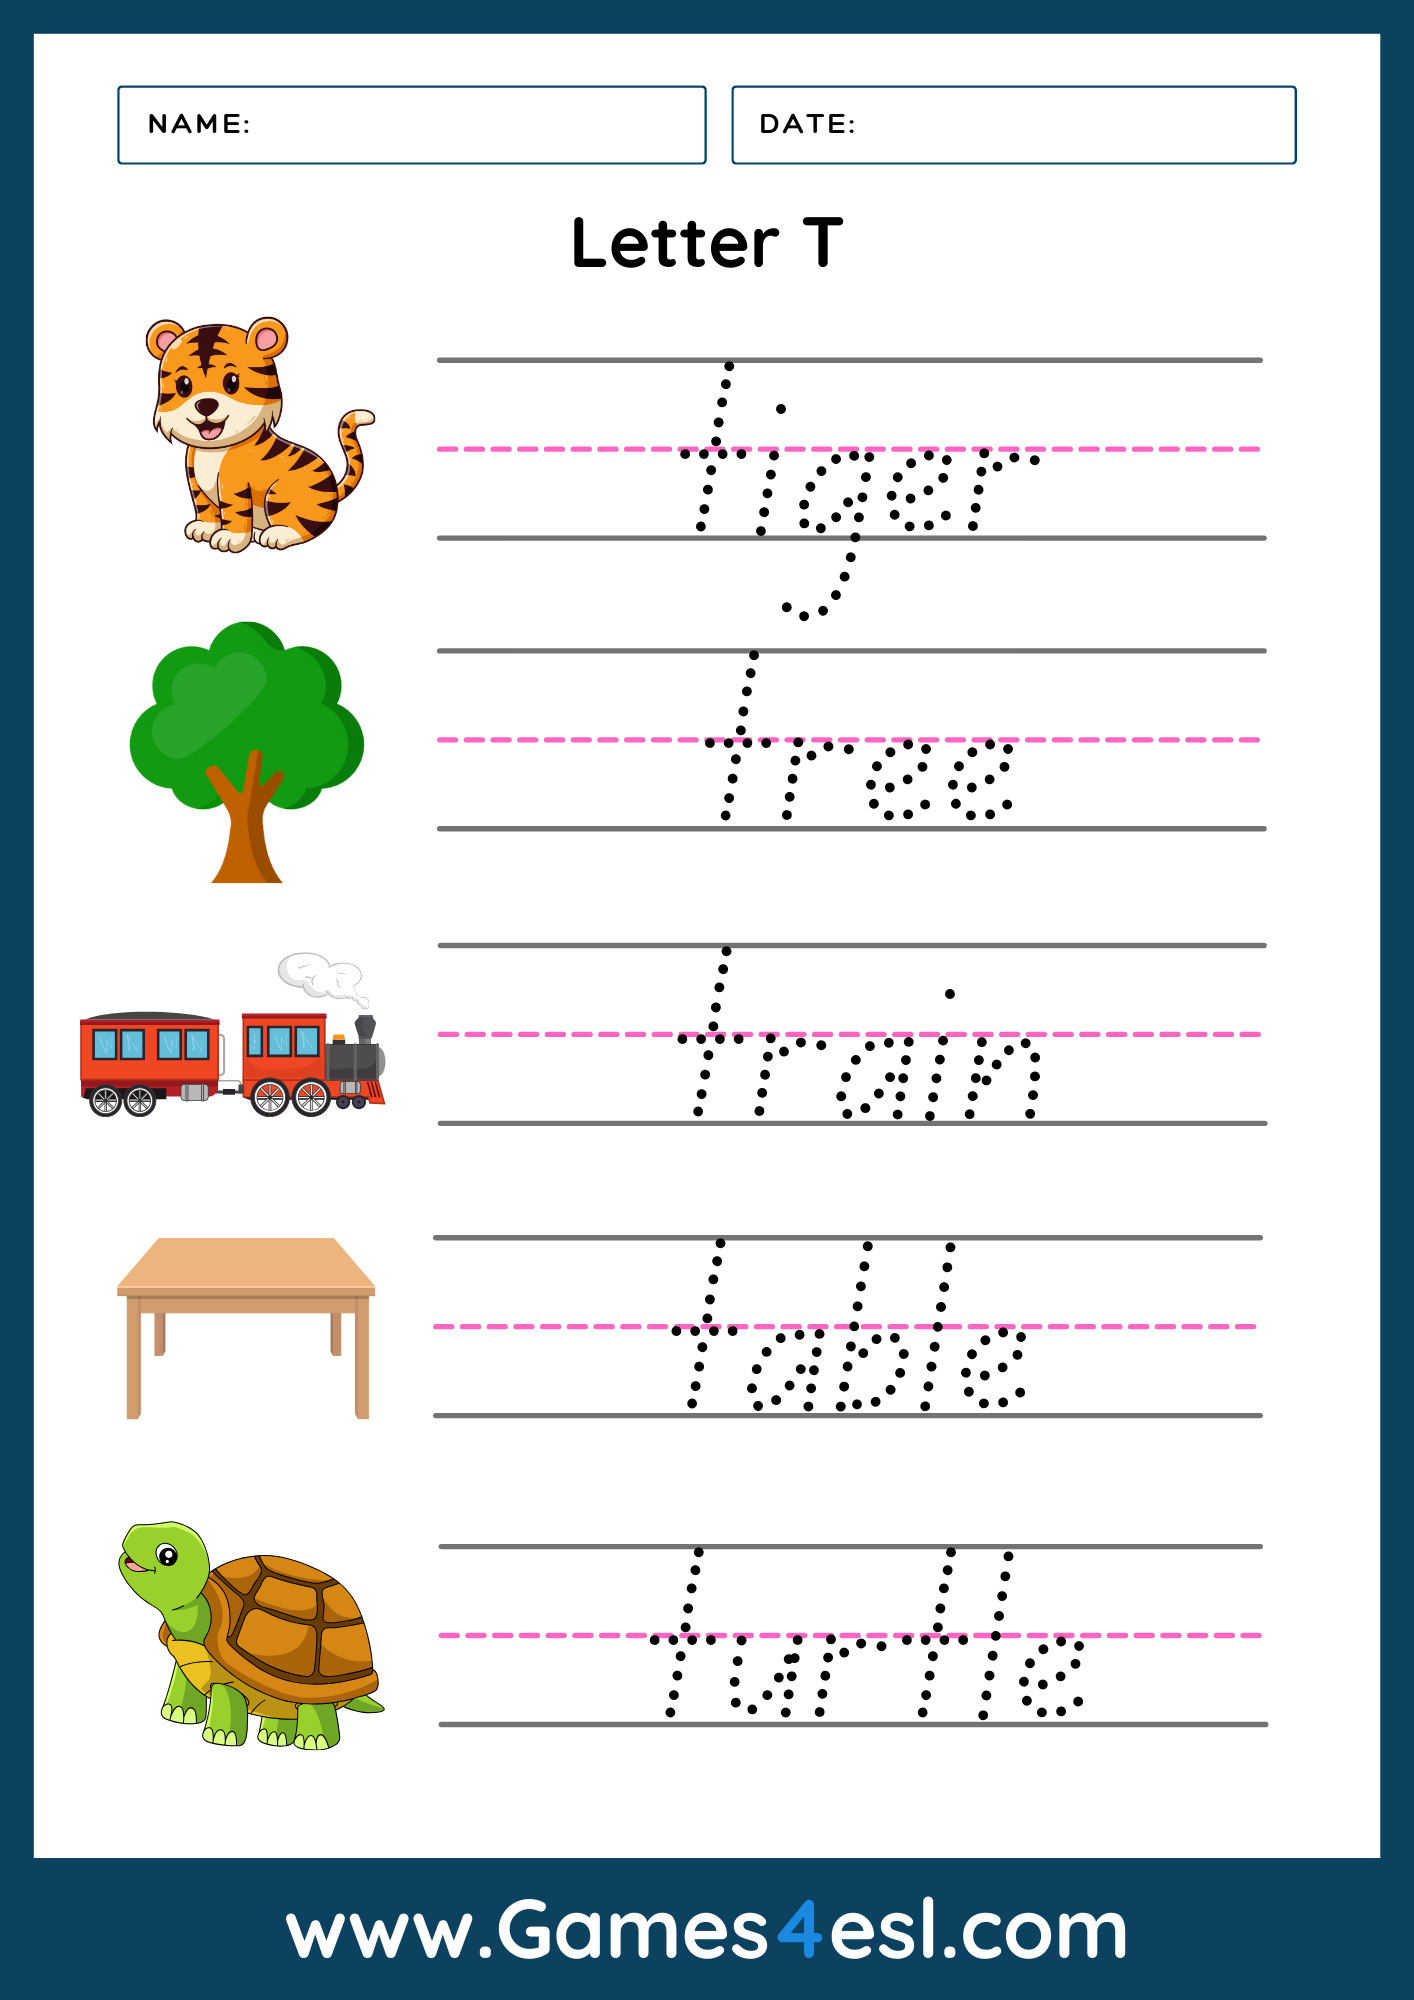 A Letter T writing worksheet